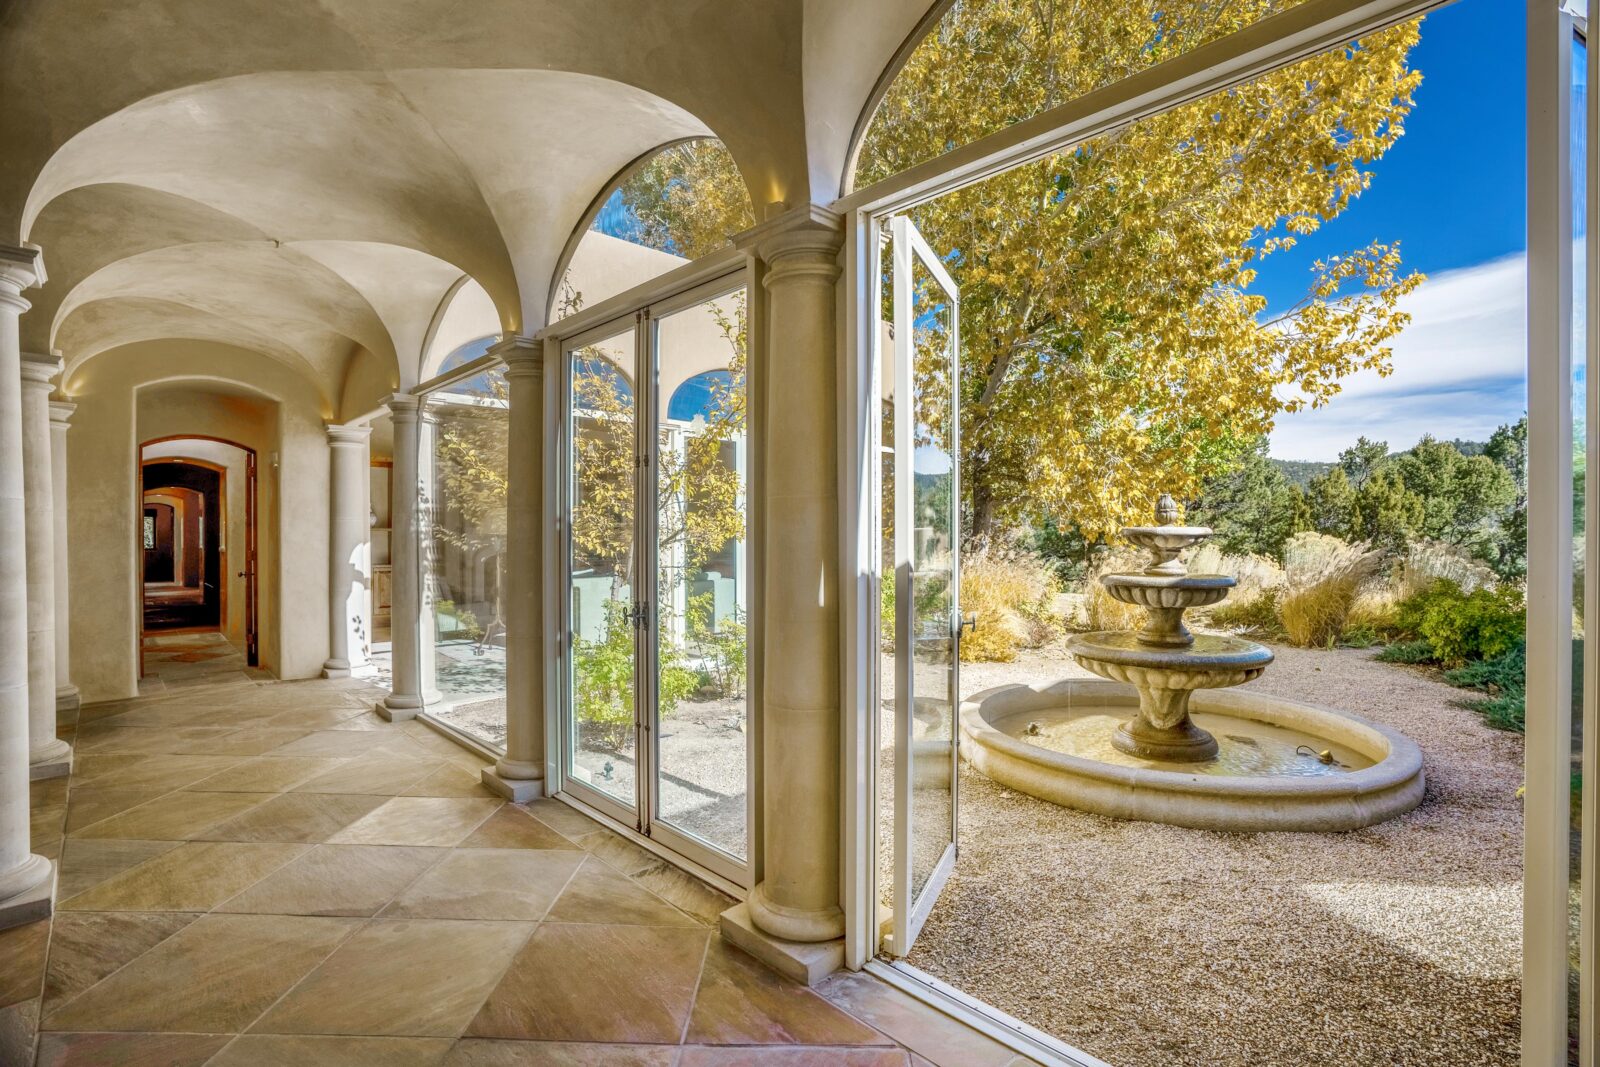 Walls of glass along the hallway open to a central courtyard with fountain. 